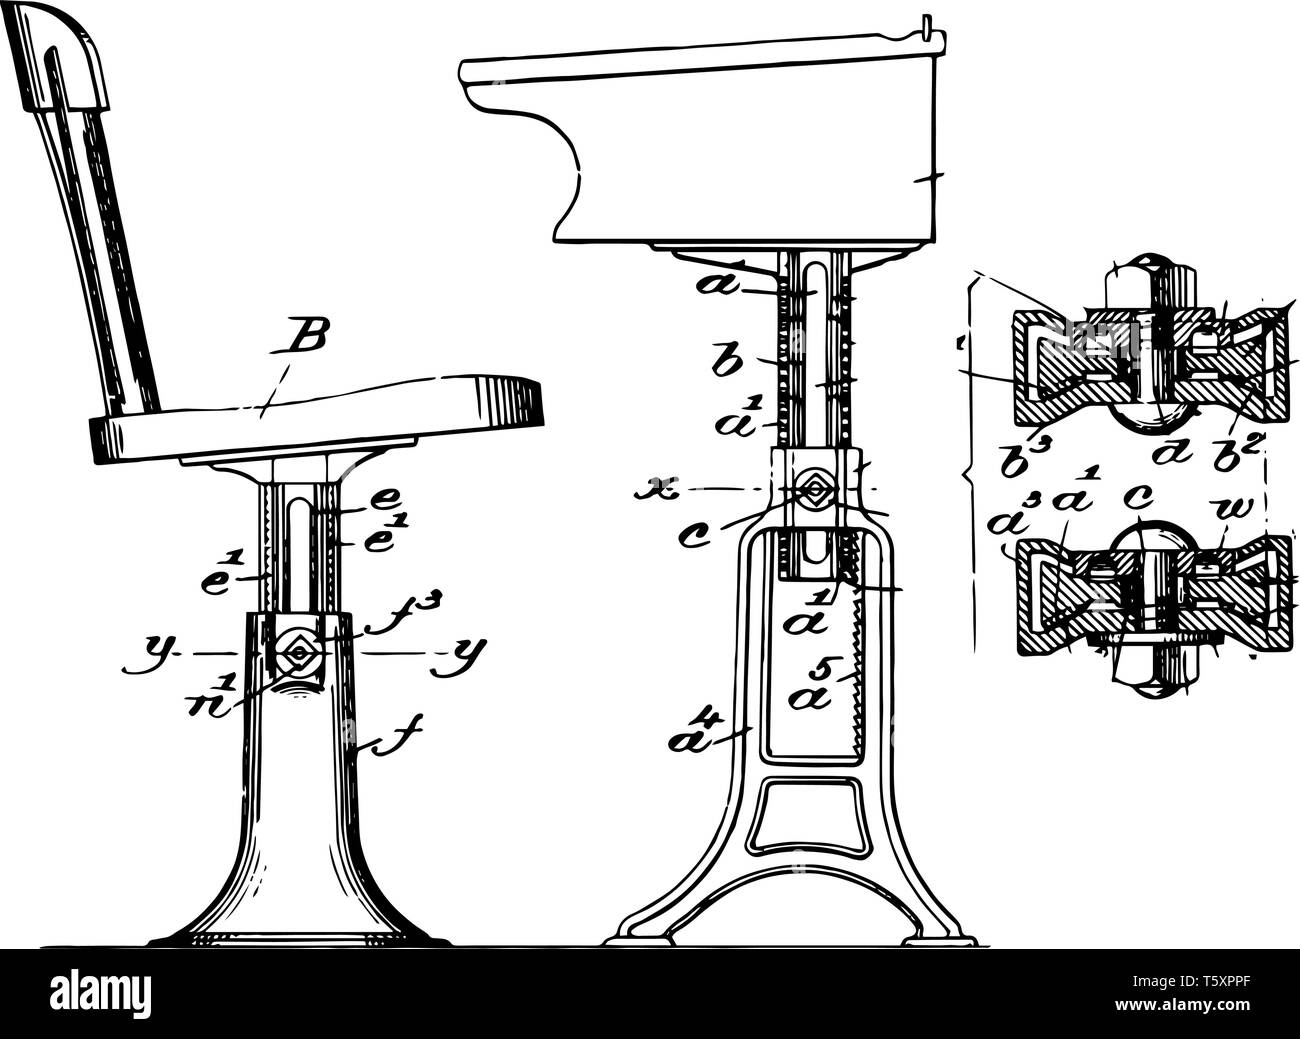 Adjustable Support for School Desks or office chair or desk chair contemporary style modern classroom vintage line drawing or engraving illustration. Stock Vector